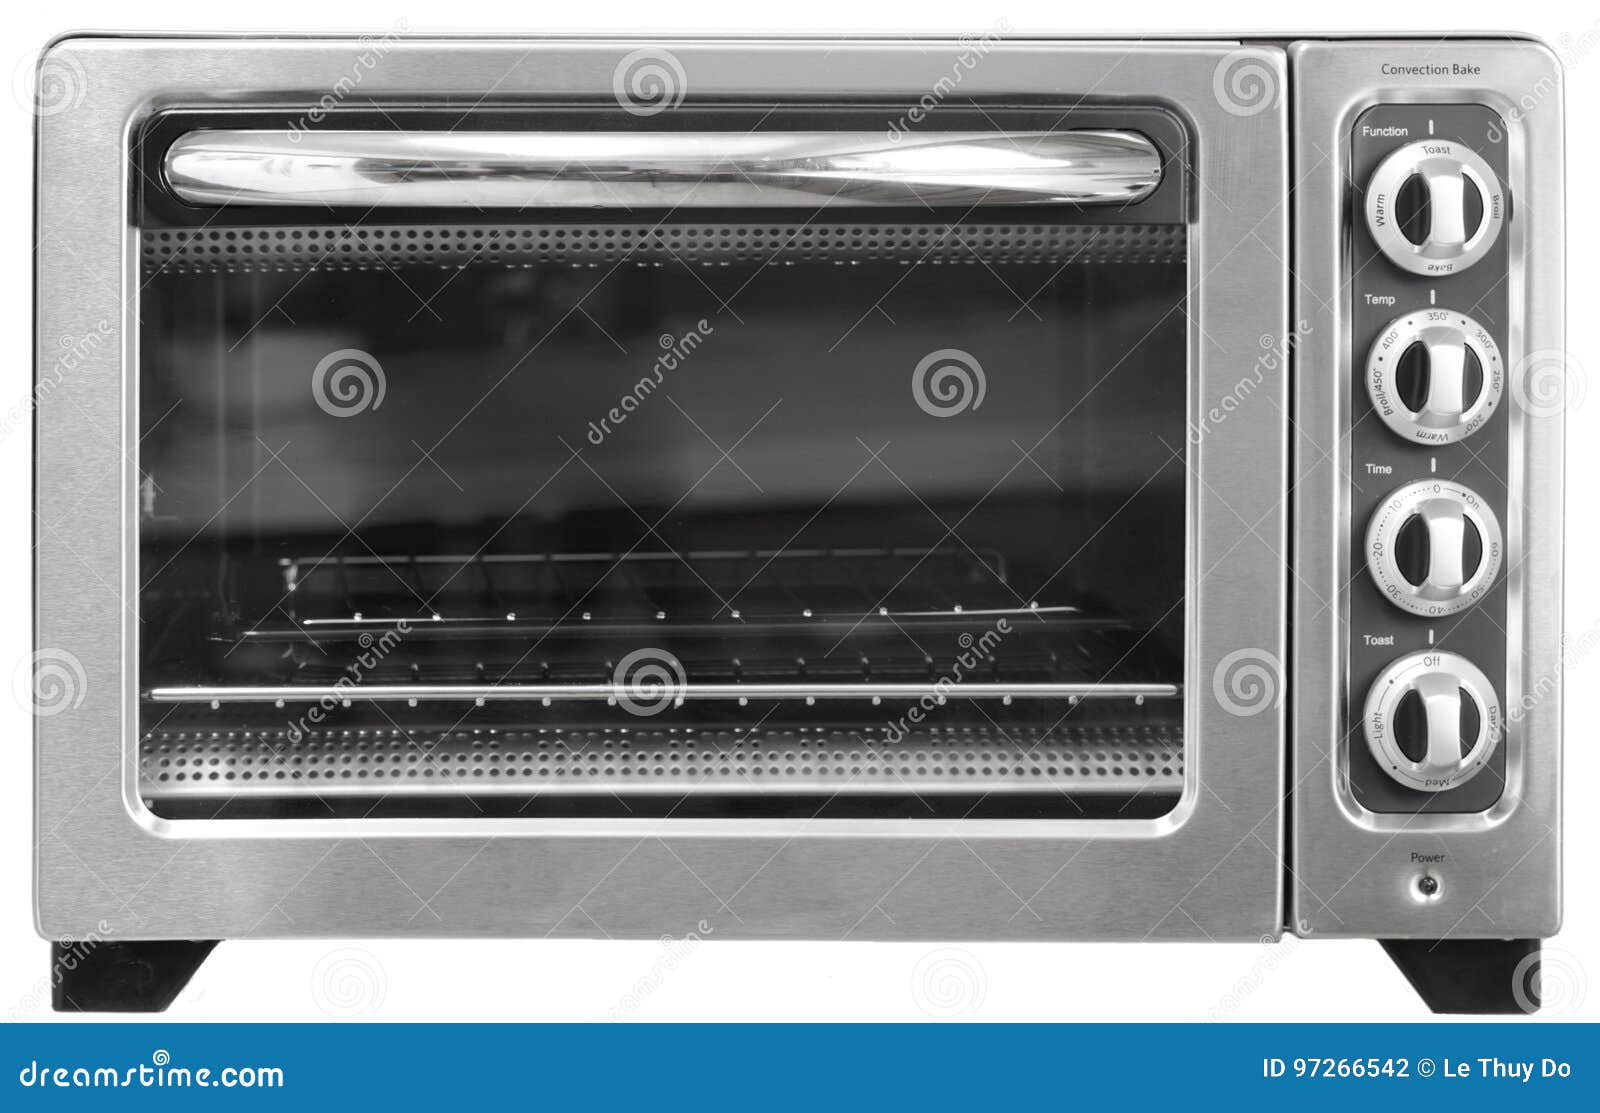 Convectional toaster oven isolated on white background